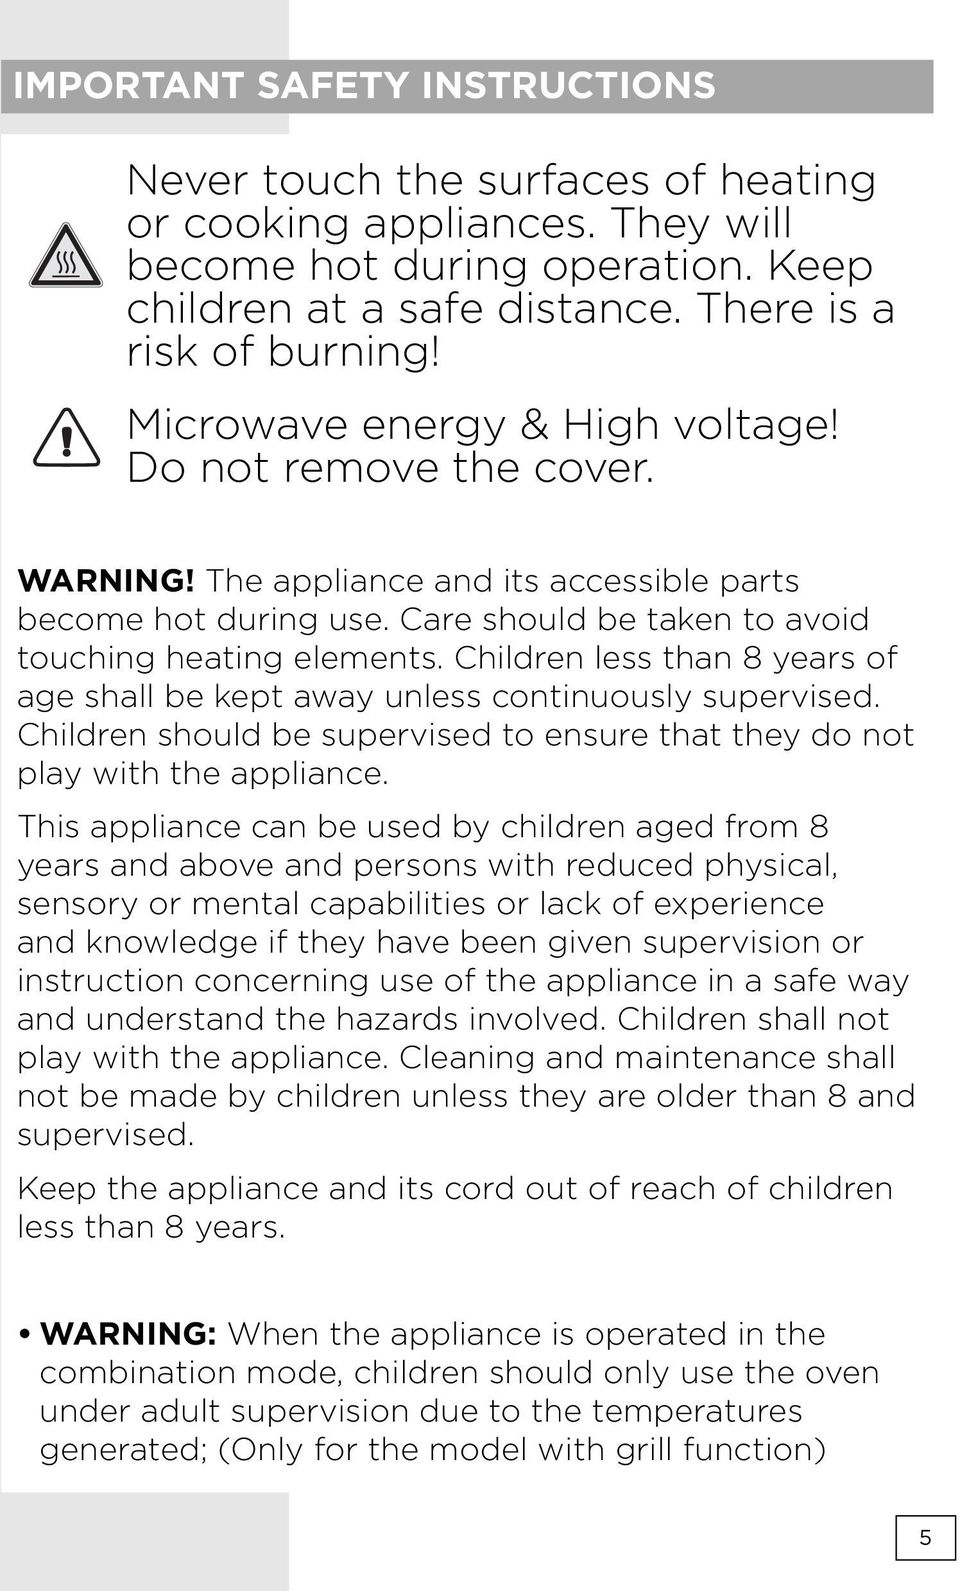 Children less than 8 years of age shall be kept away unless continuously supervised. Children should be supervised to ensure that they do not play with the appliance.